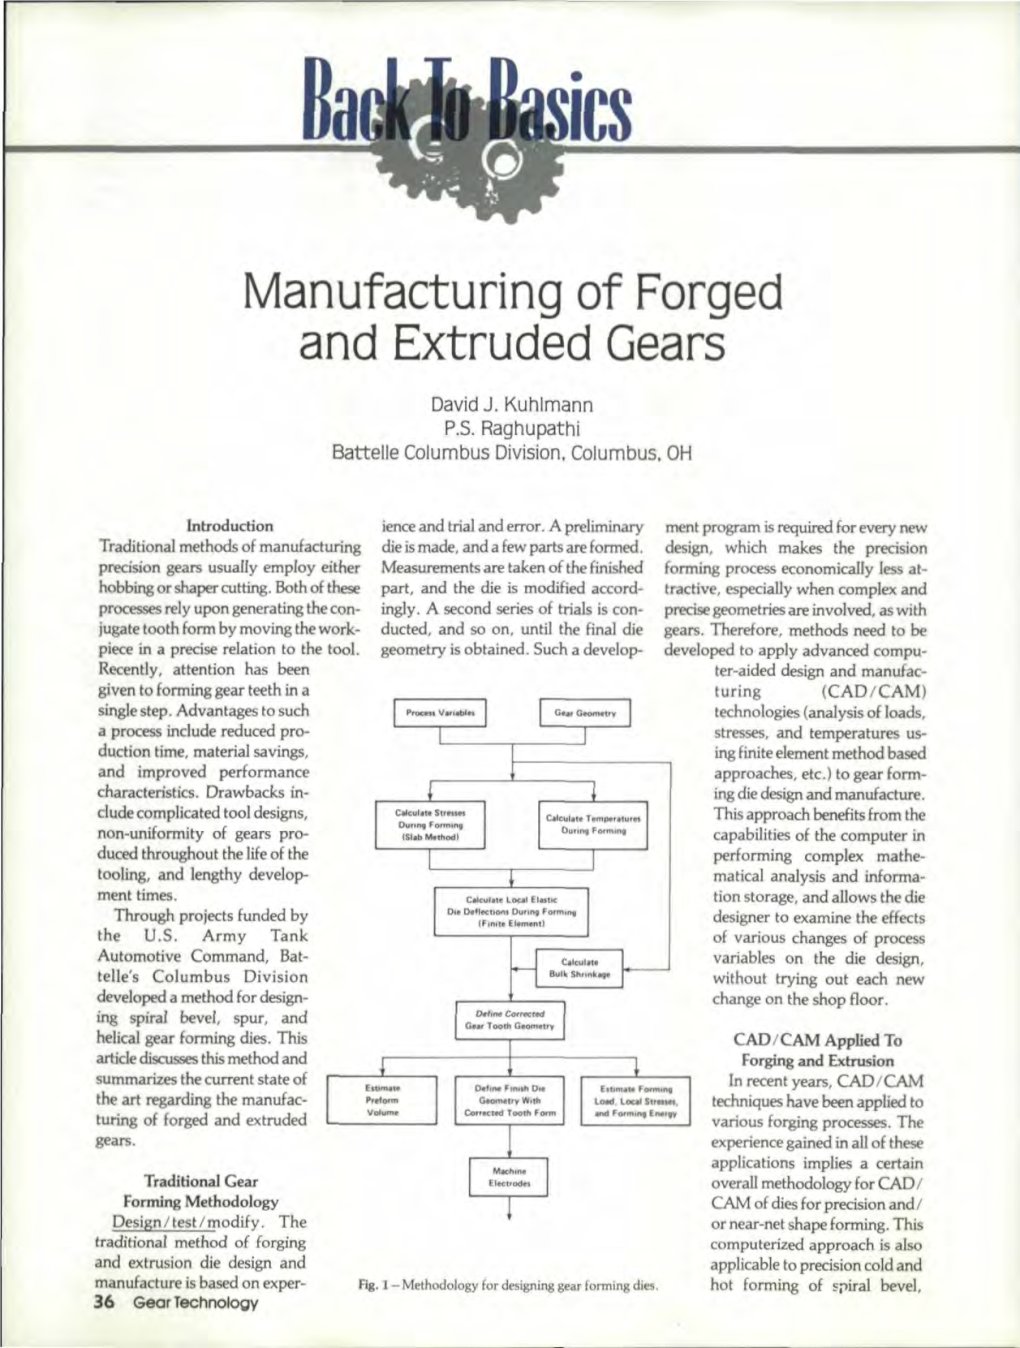 Manufacturing of Forged and Extruded Gears